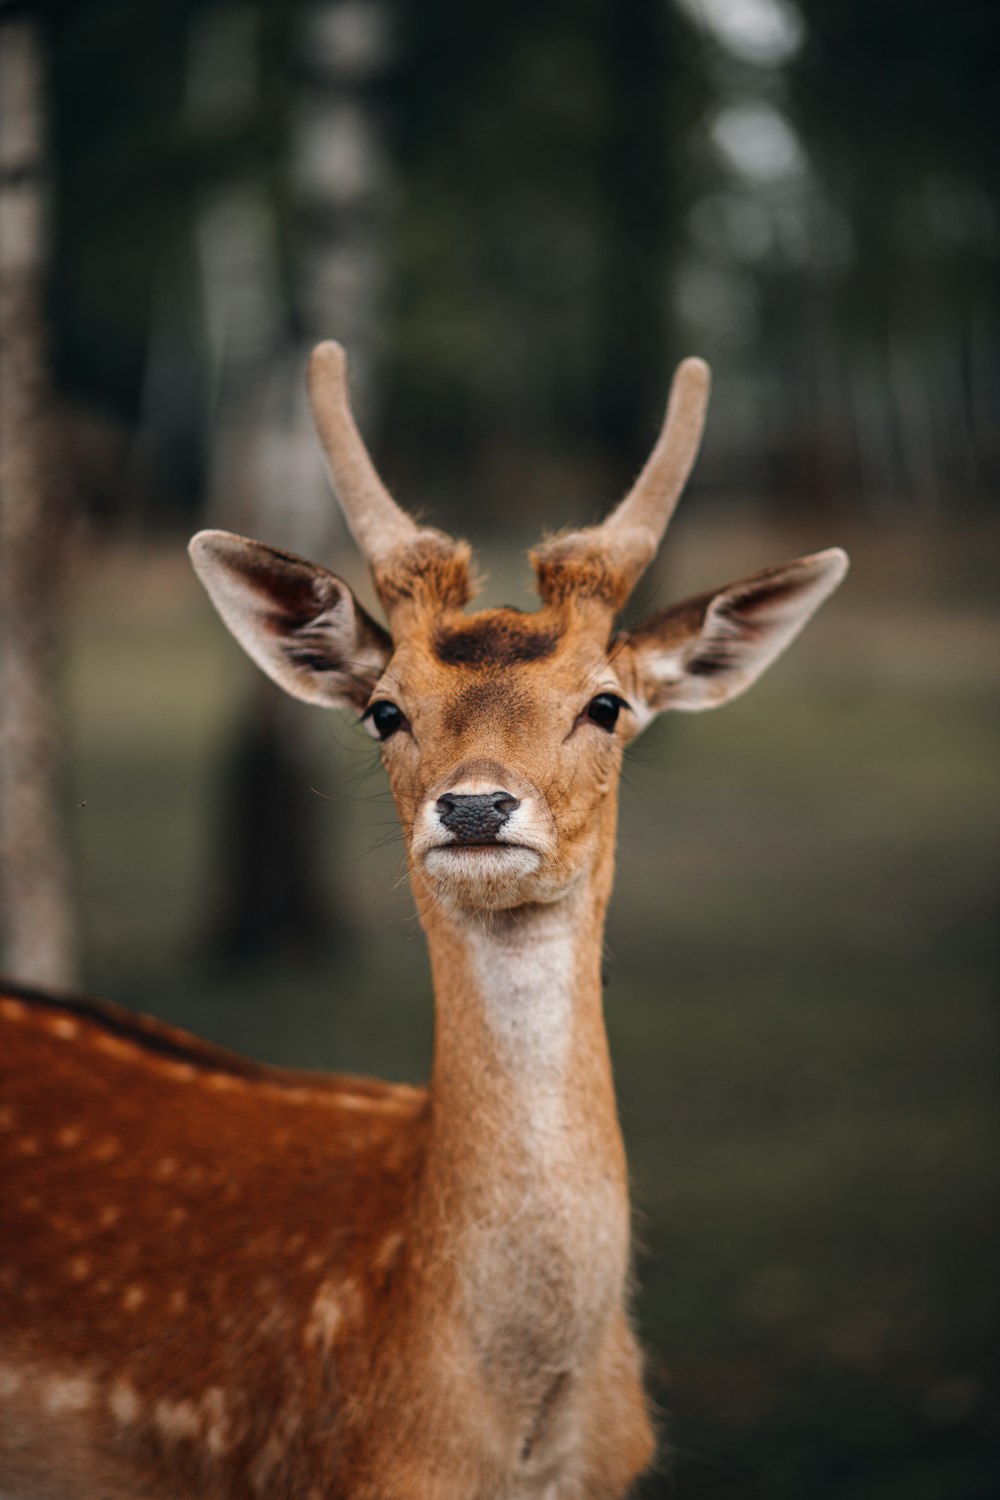 a close up of a deer's face with trees in the background